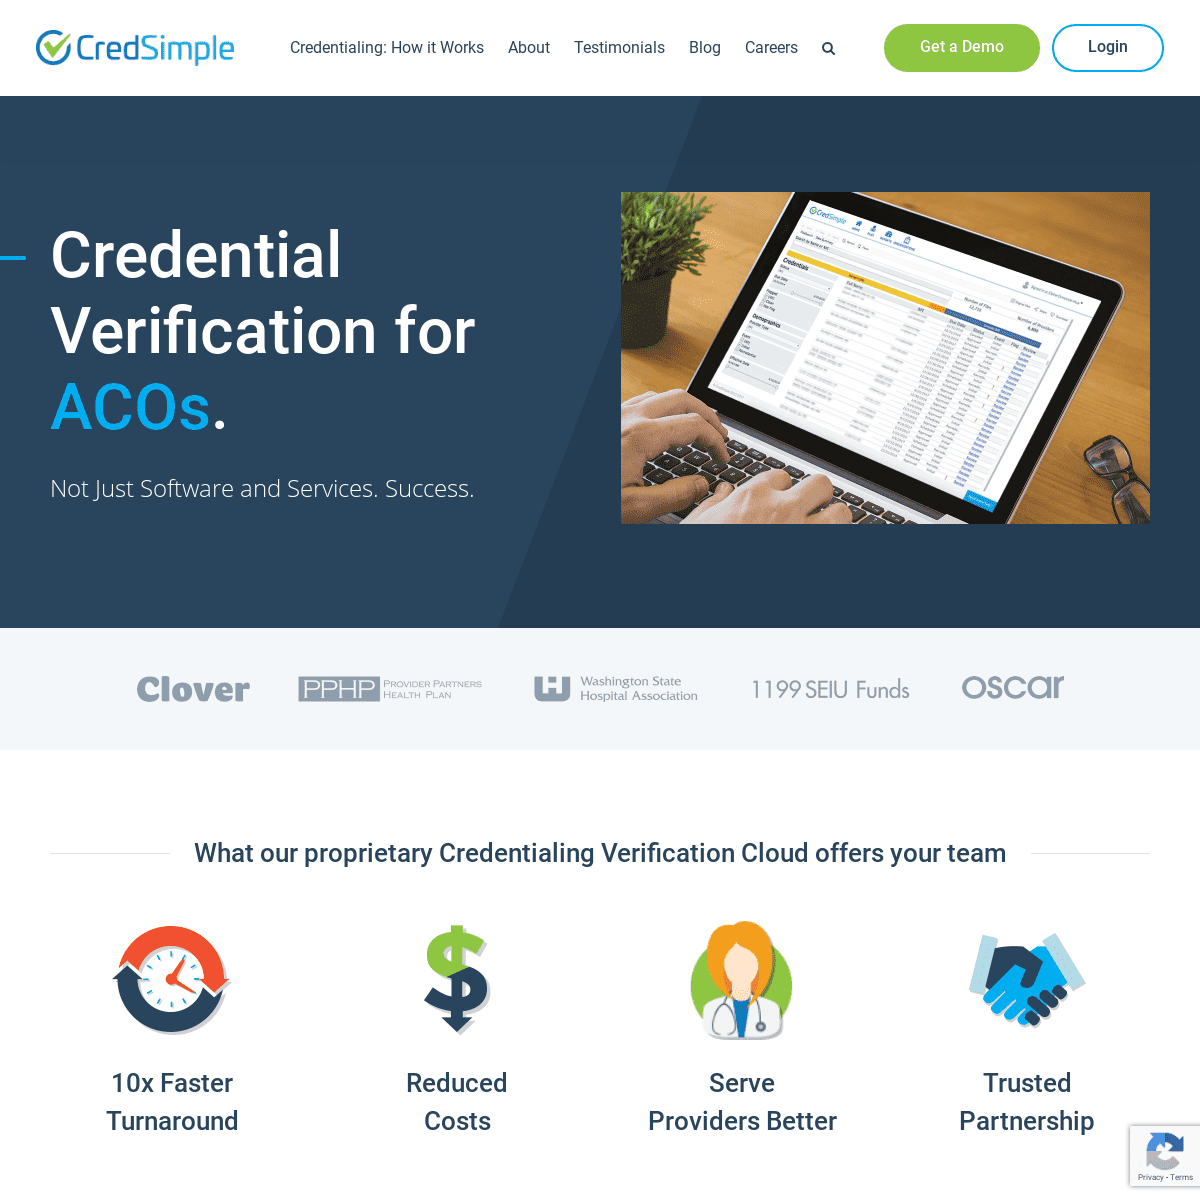 A complete backup of credsimple.com